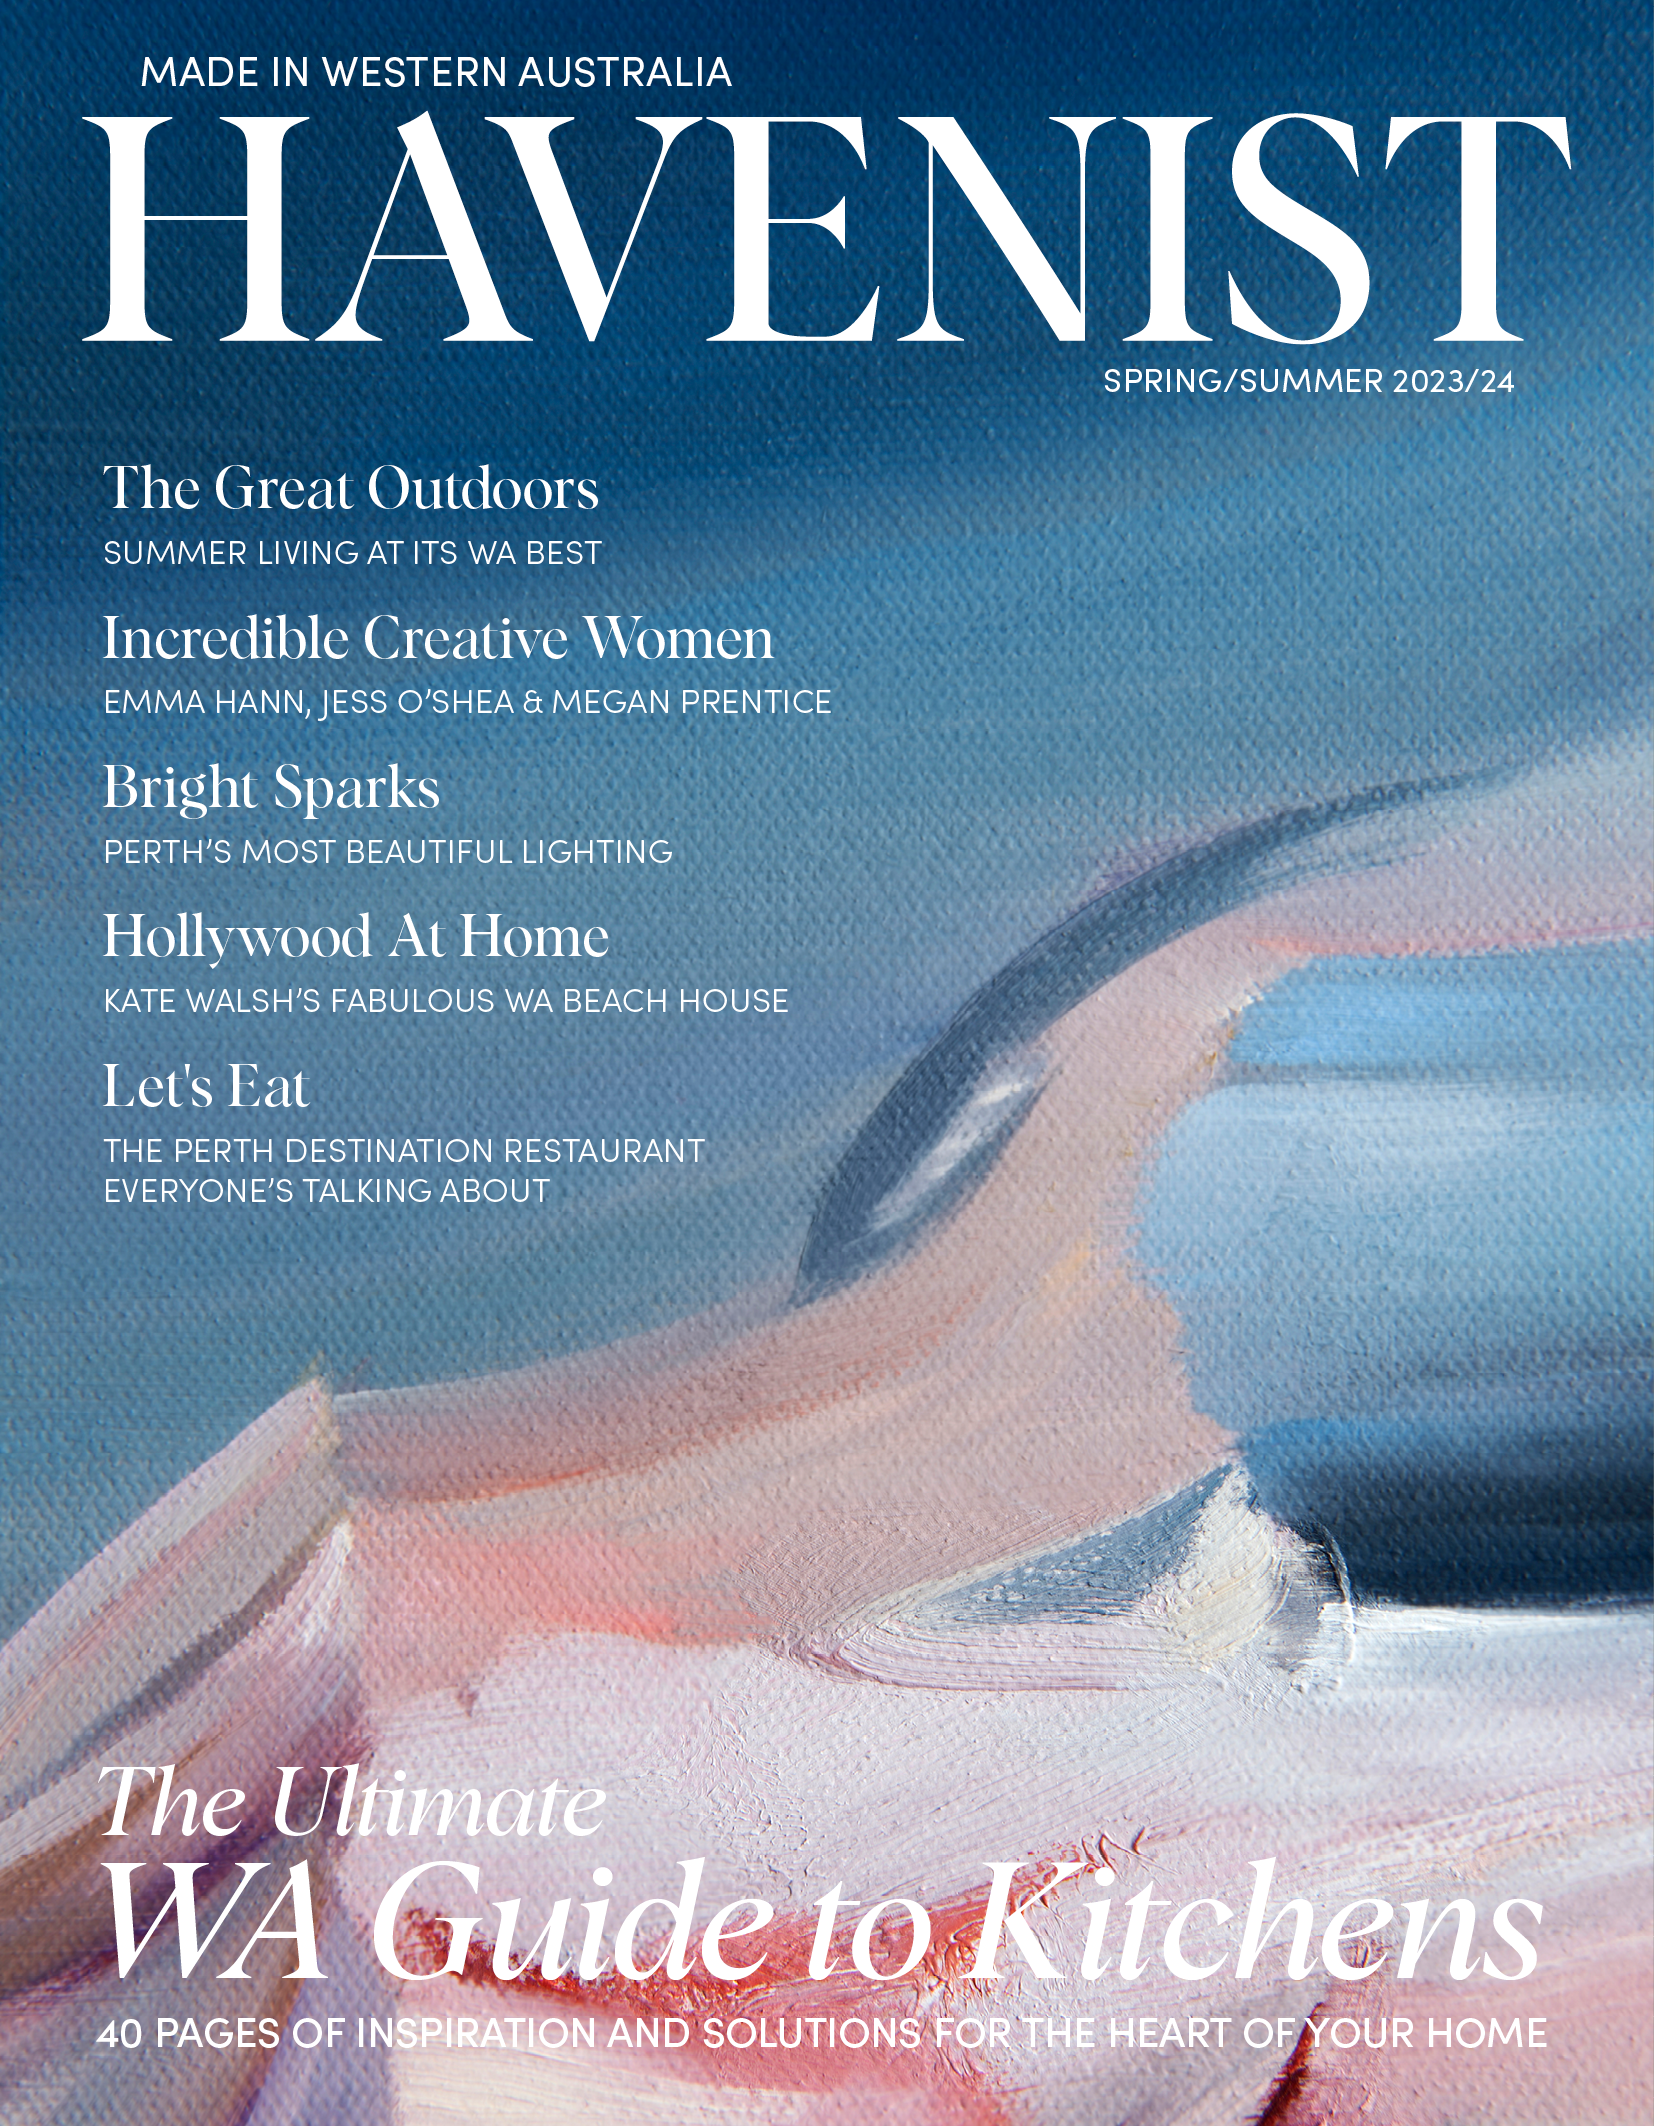 HAVEN magazine cover, lifestyle and home in Western Australia.